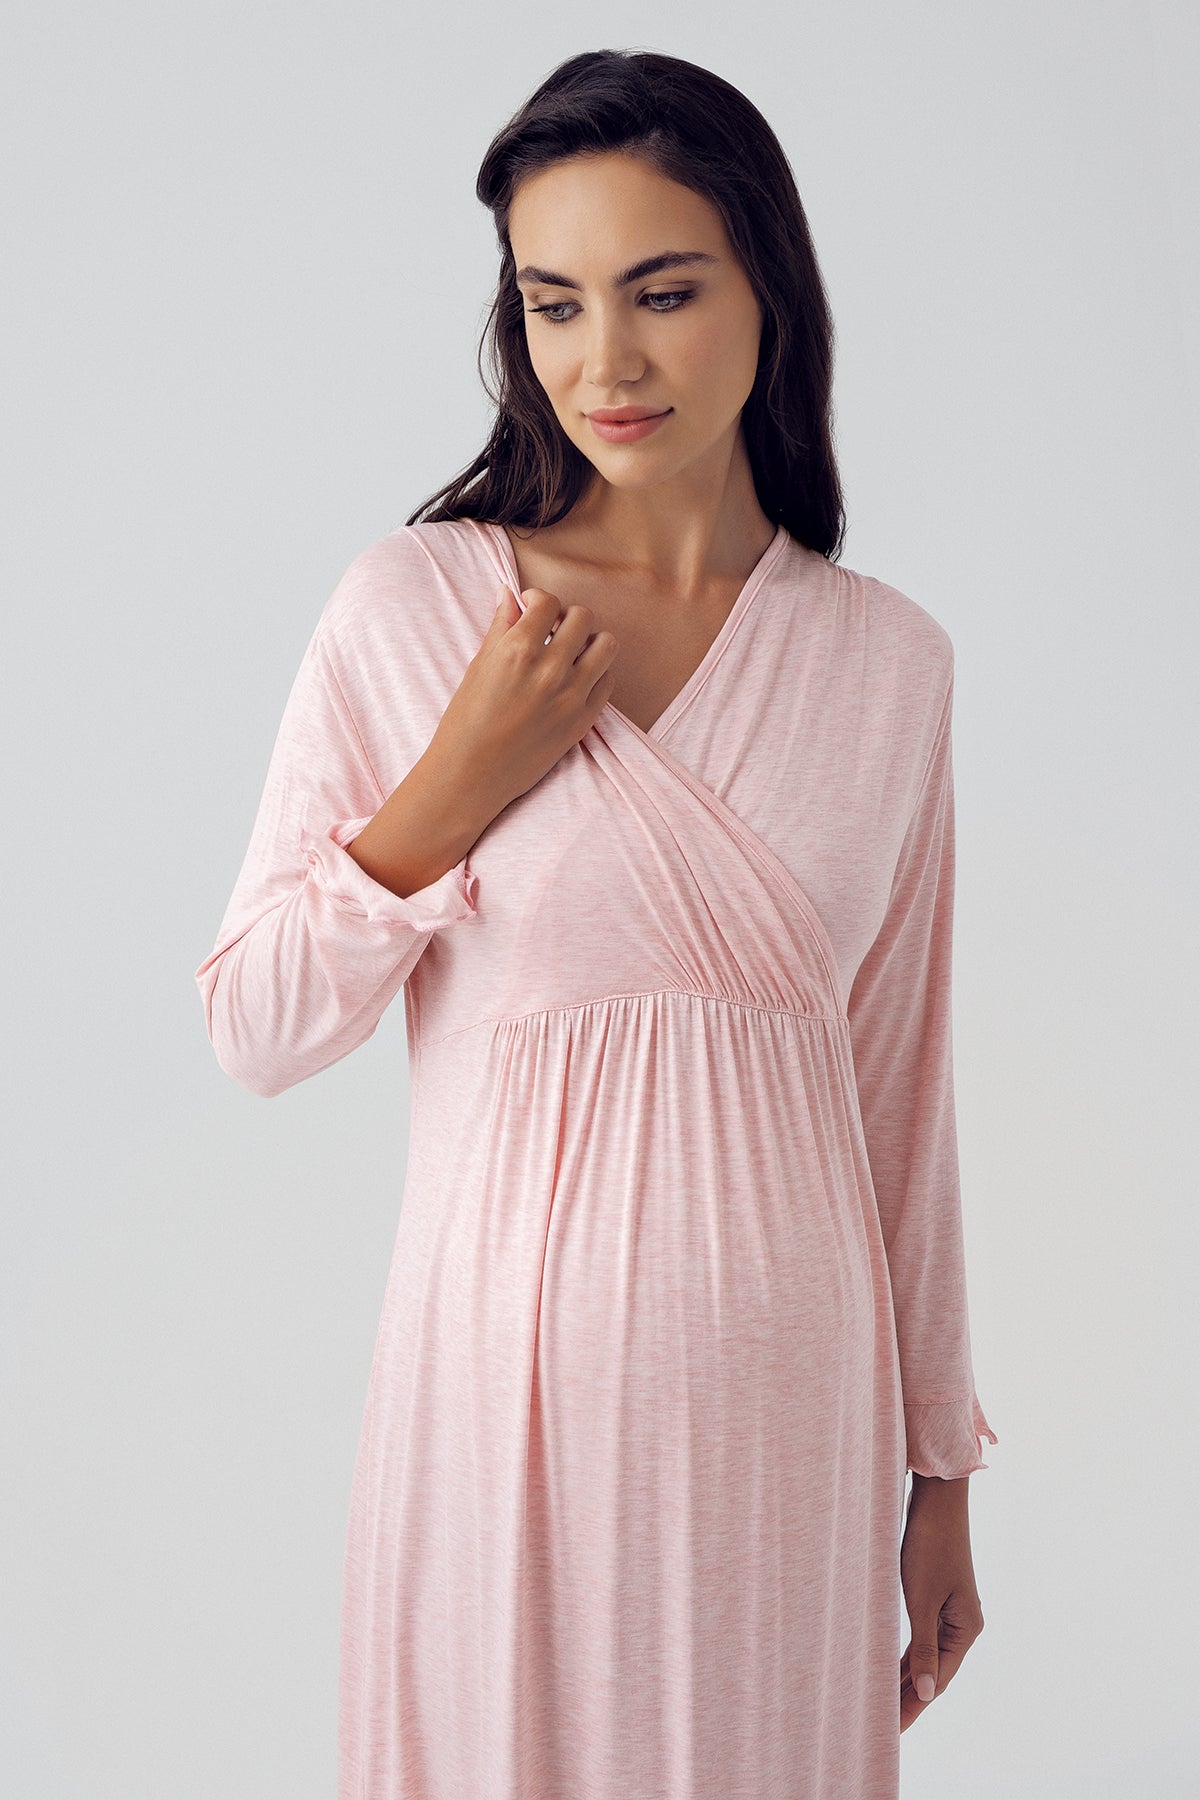 Double Breasted Maternity & Nursing Nightgown With Polka Dot Robe Powder - 15402